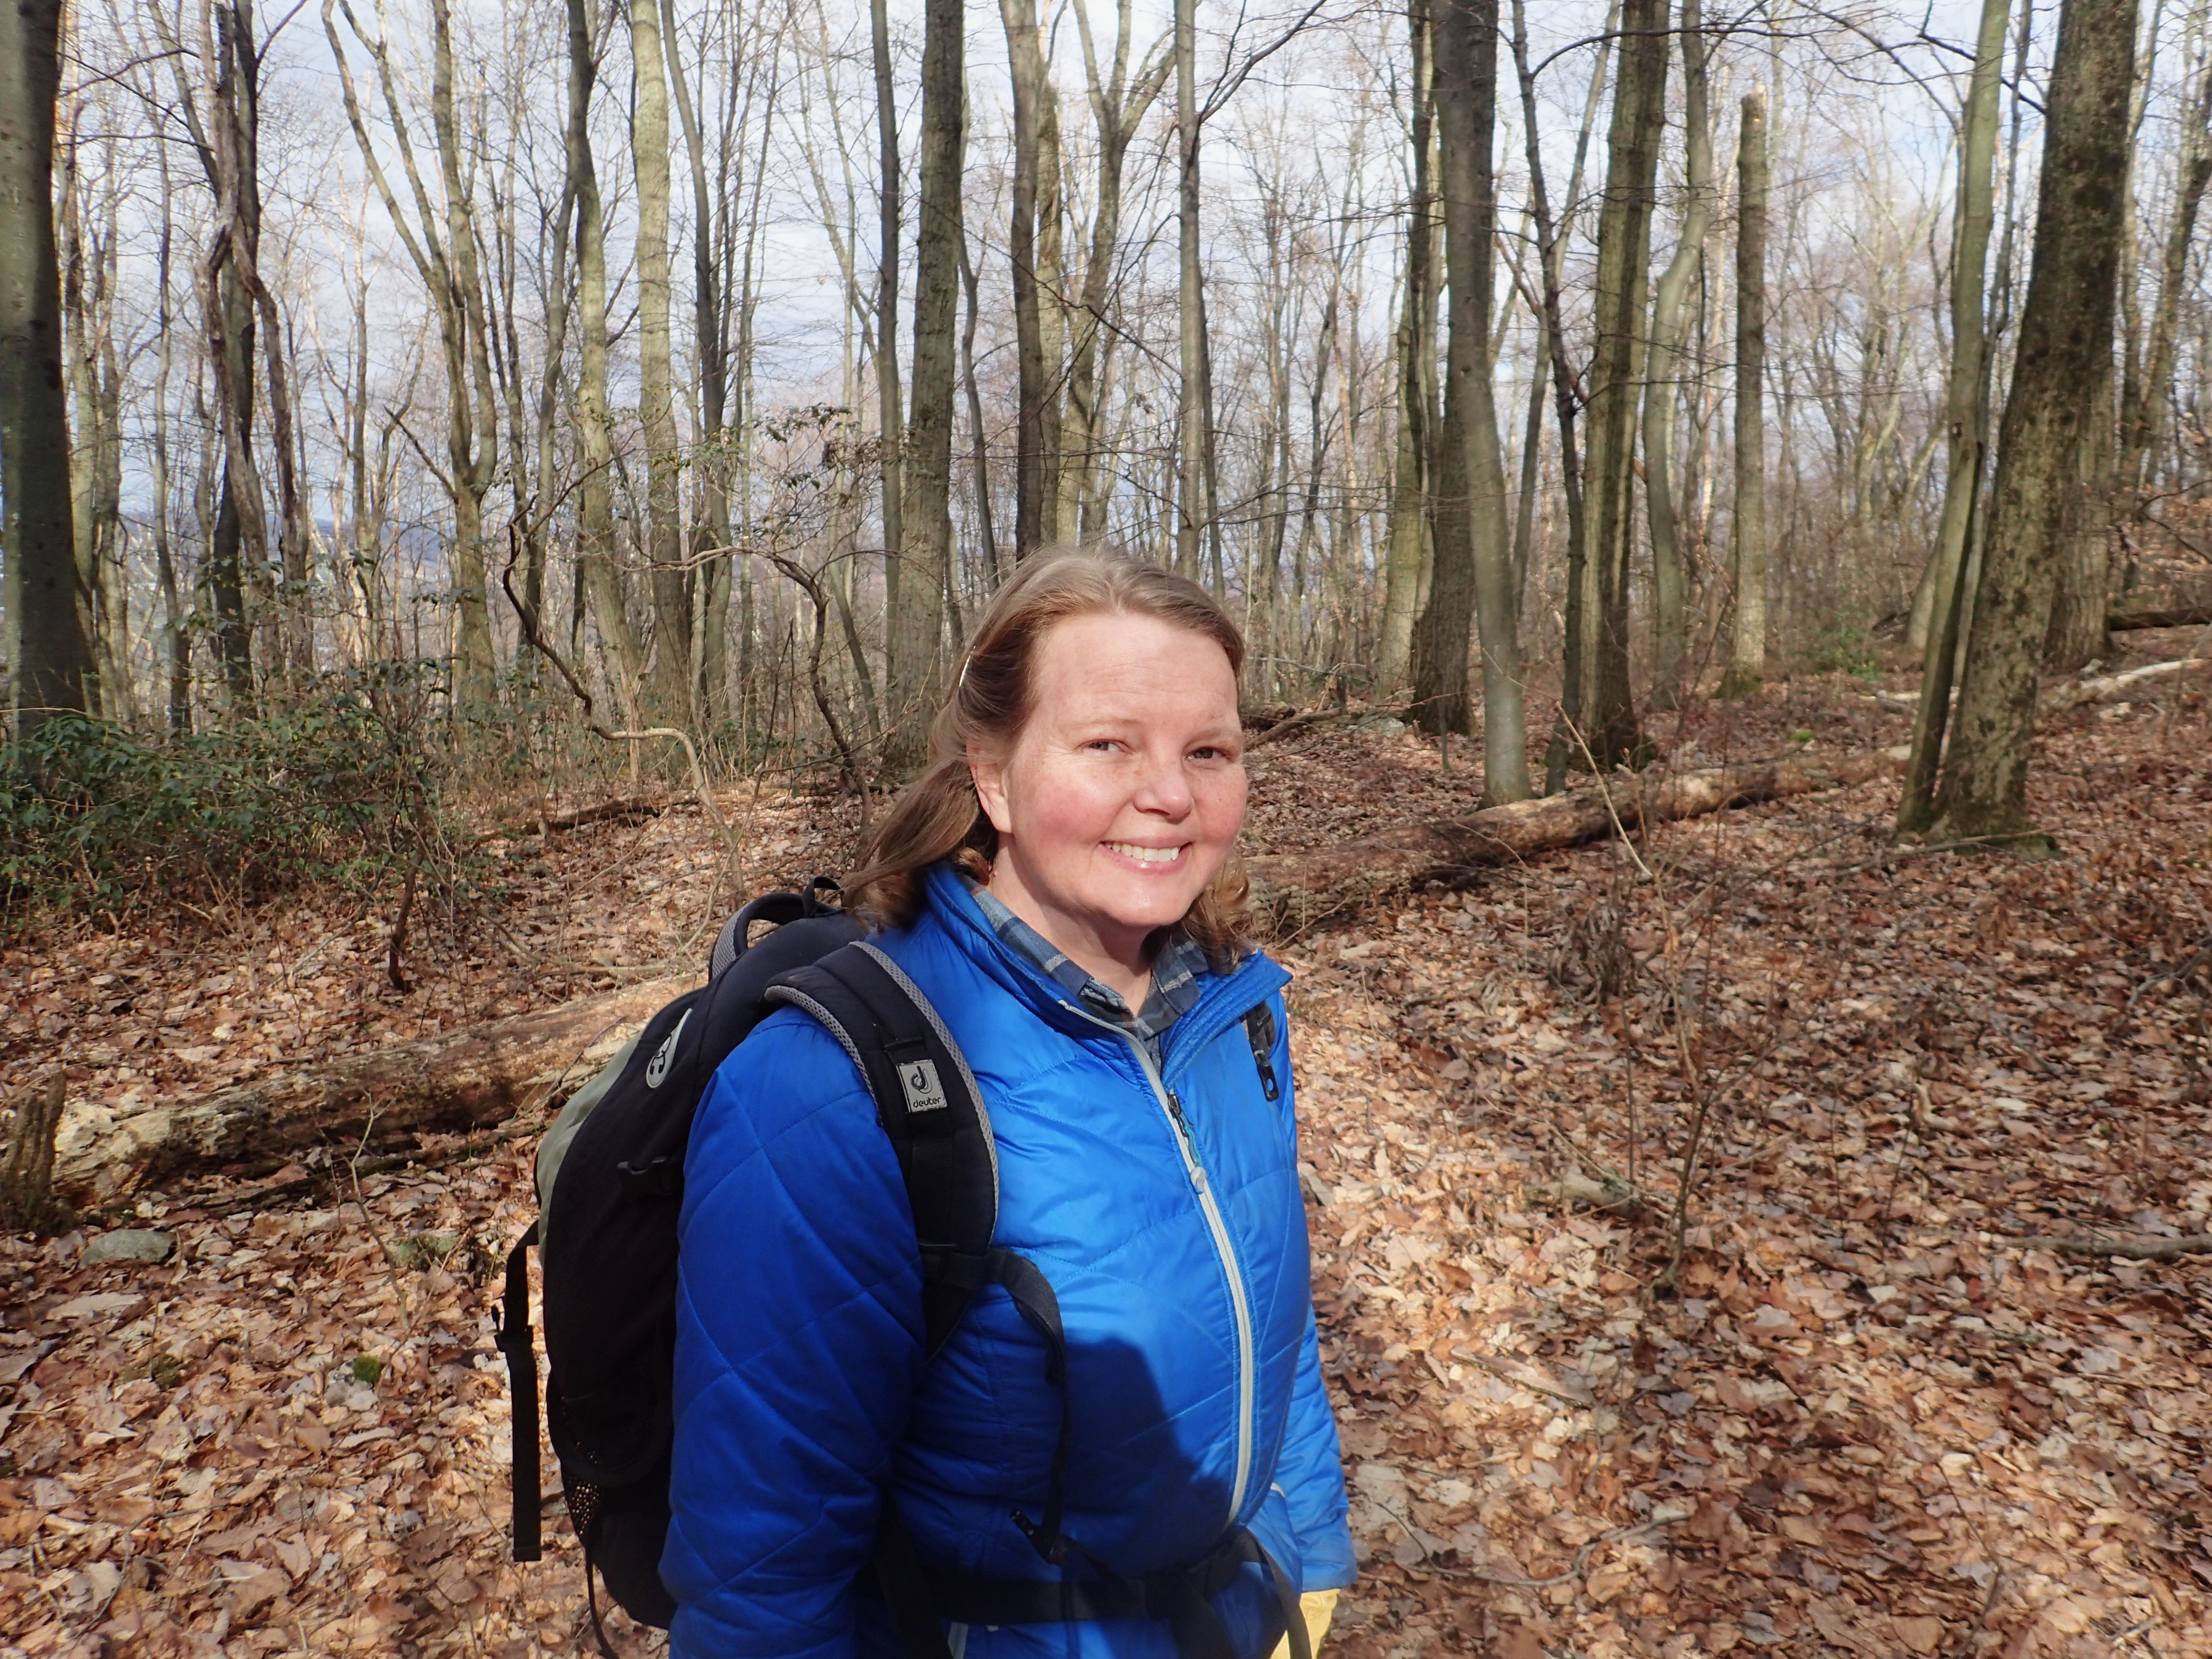 Dr. Erin Kraal, hiking in a forest in autumn, surrounded by bare trees and fallen leaves